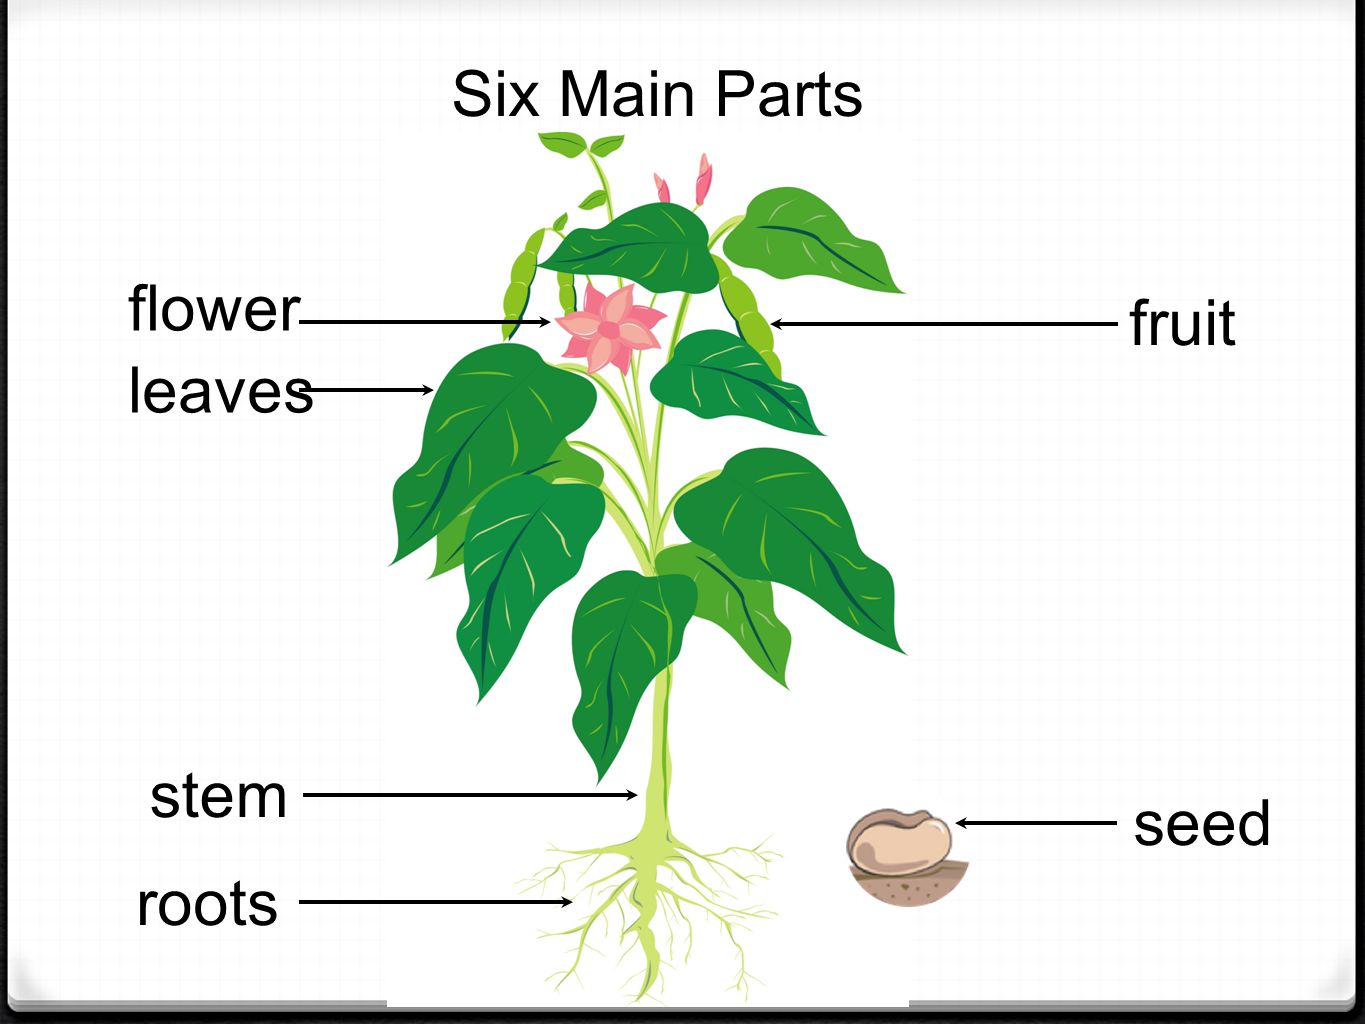 leaves flower stem roots seed fruit Six Main Parts